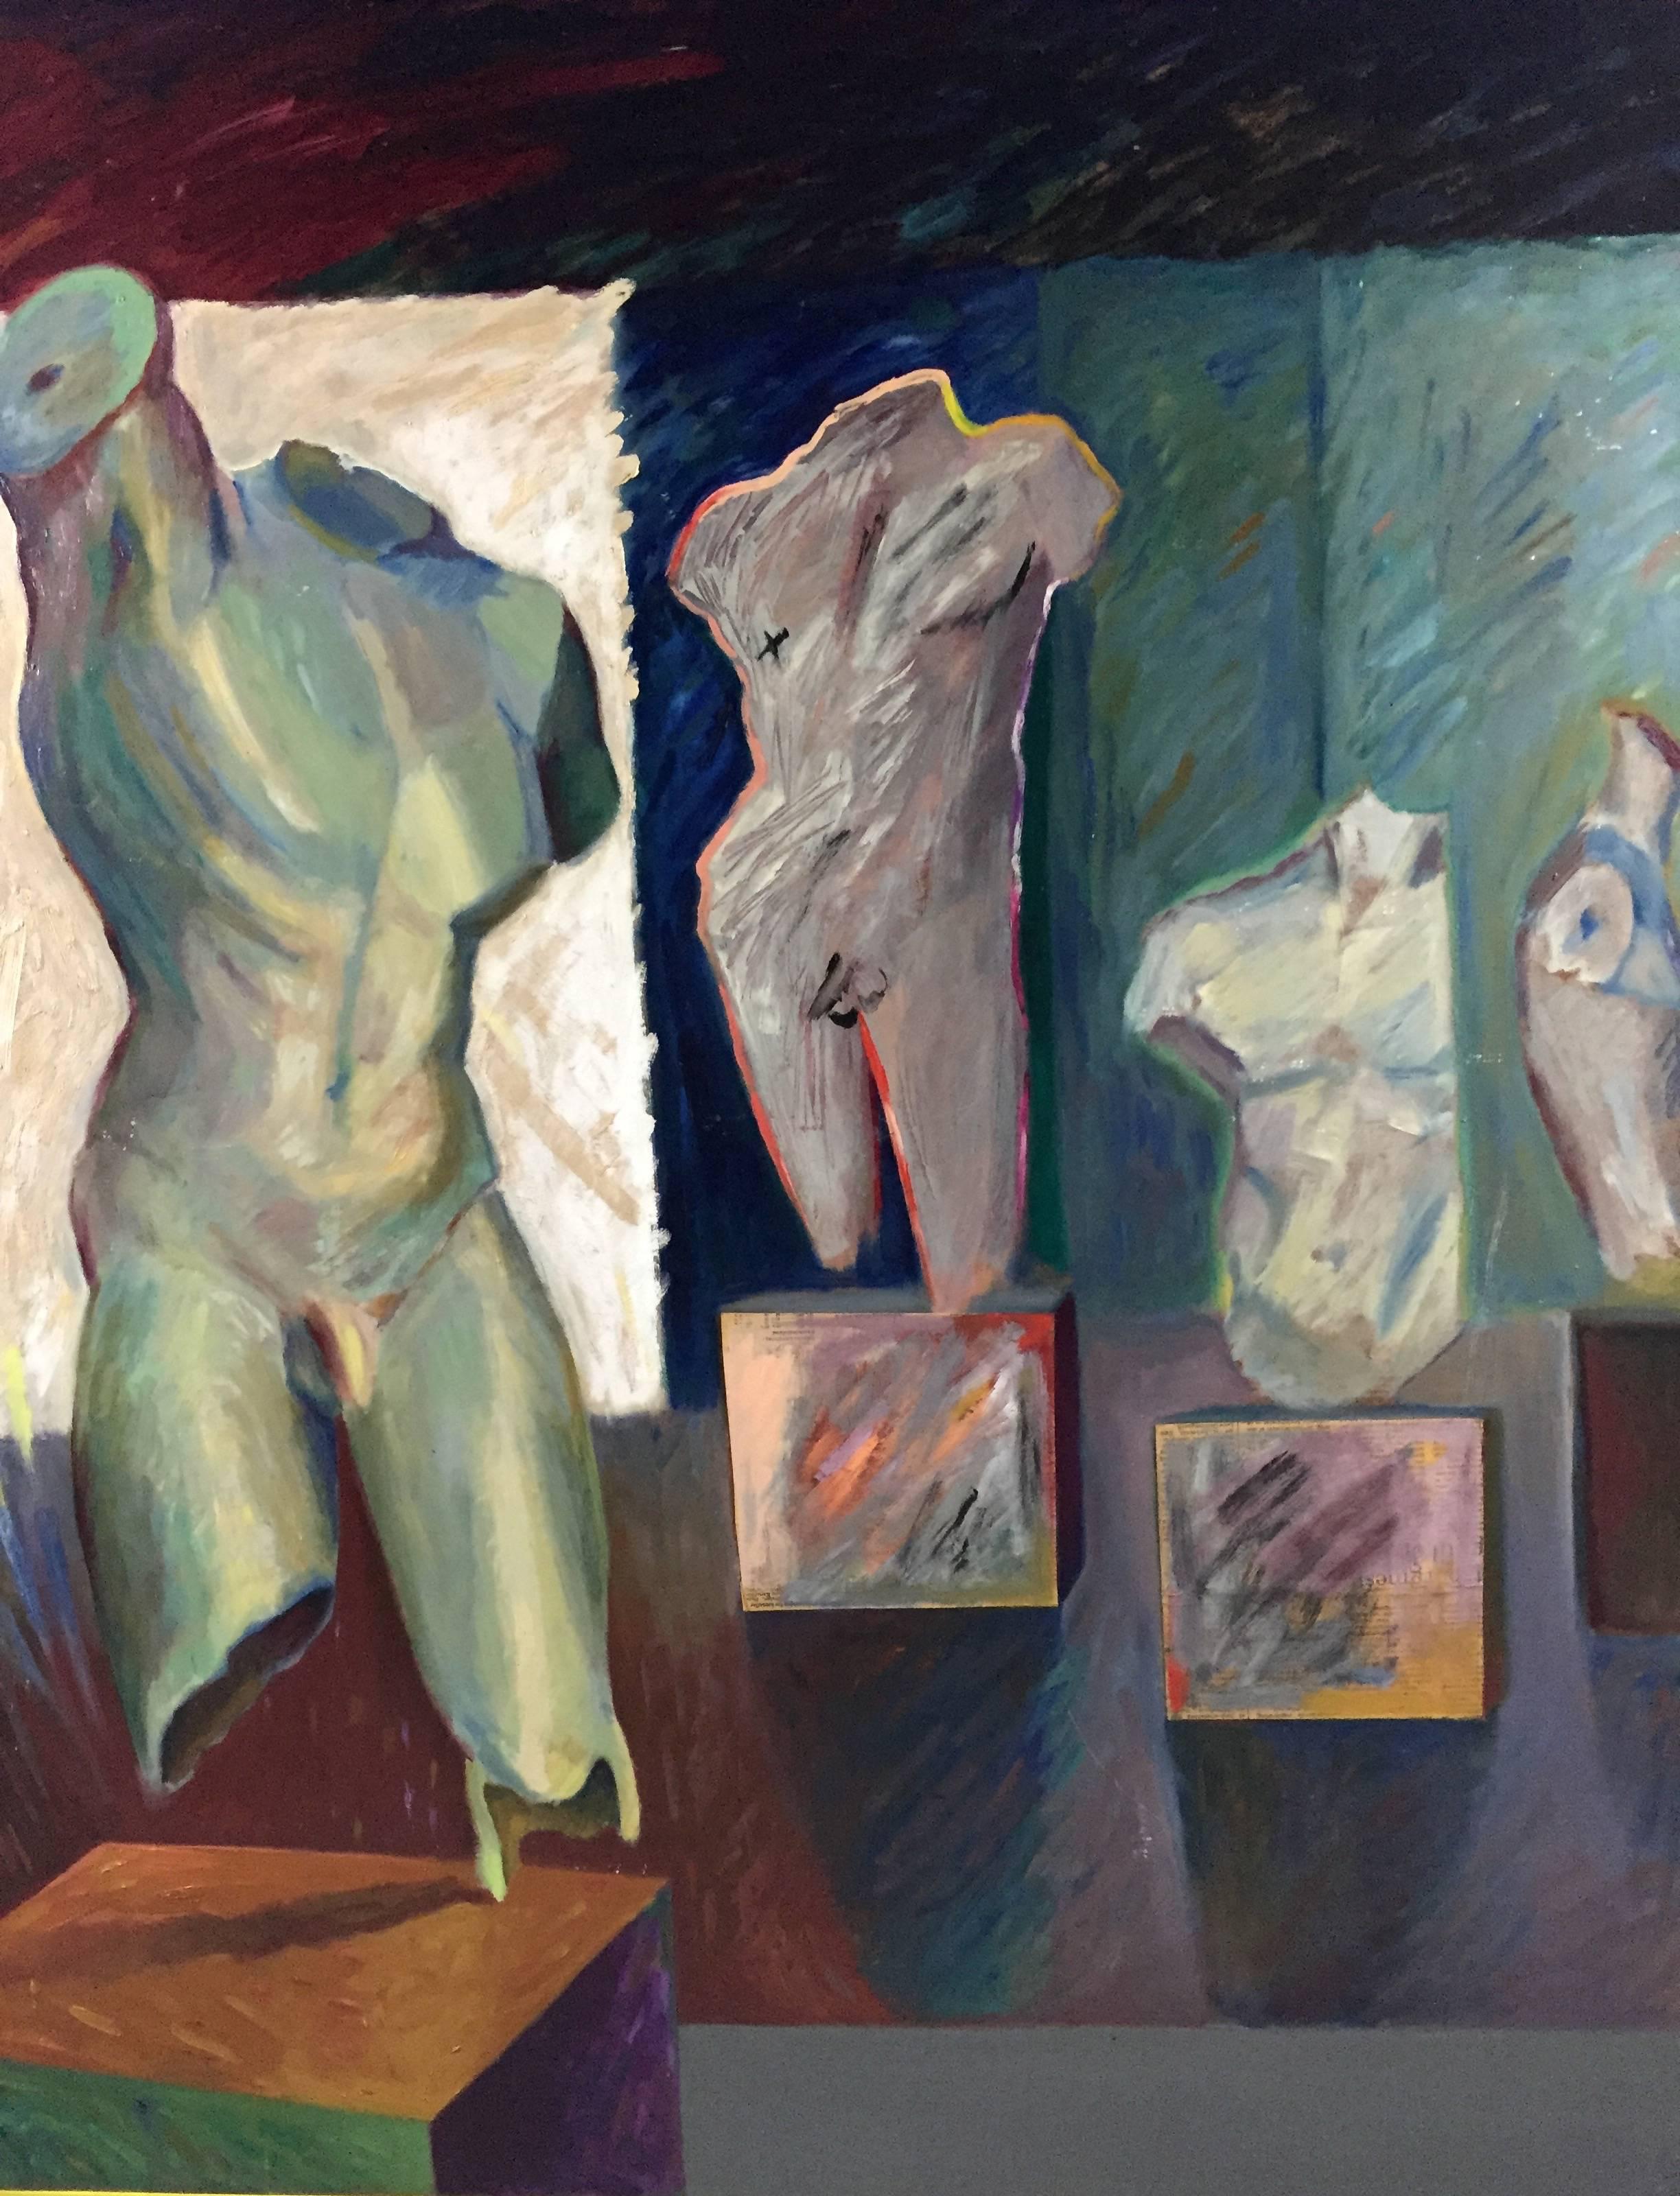 Large-scale oil and mixed-media on composition board of stylized torsos, yellow-painted wood frame by multi-talented artist Ulla Diedrichsen, Denmark, 1980. Signed bottom right UD-80.

Painting possibly part of her first solo exhibition at the